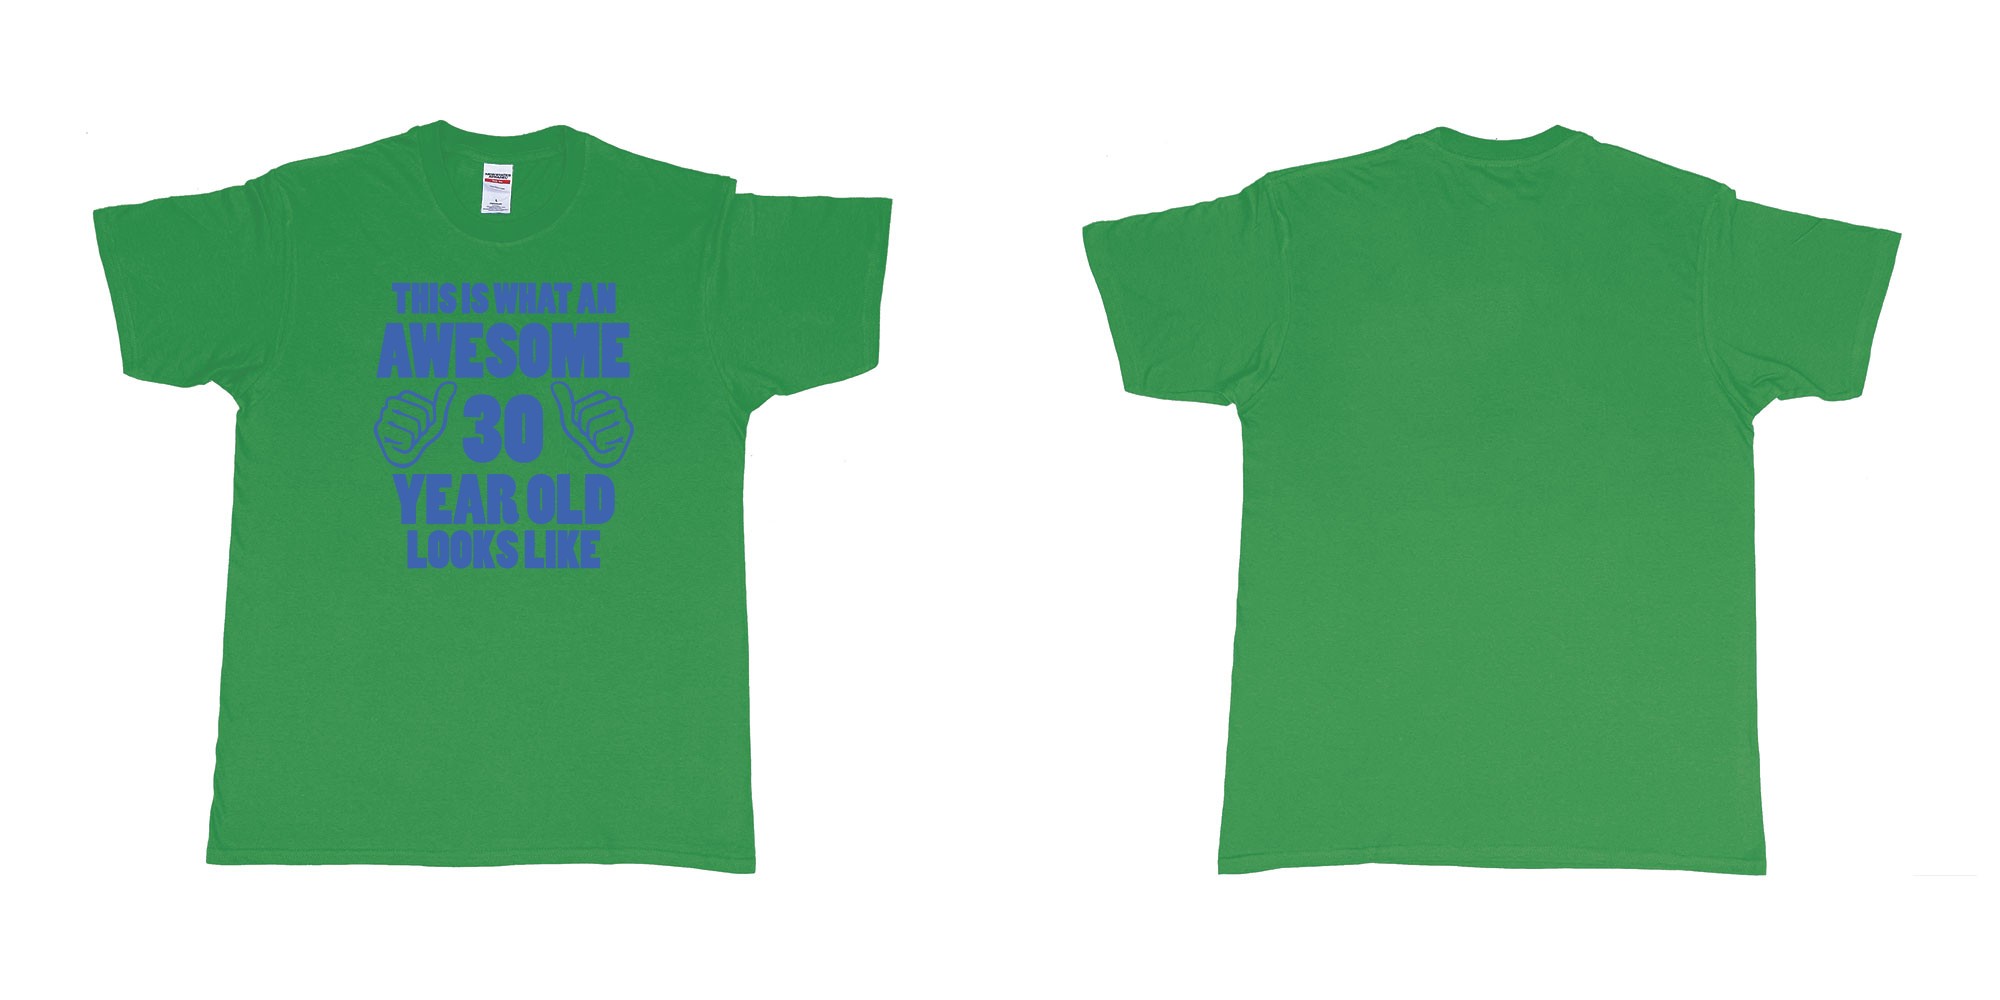 Custom tshirt design this is what an awesom 30 year old look like in fabric color irish-green choice your own text made in Bali by The Pirate Way